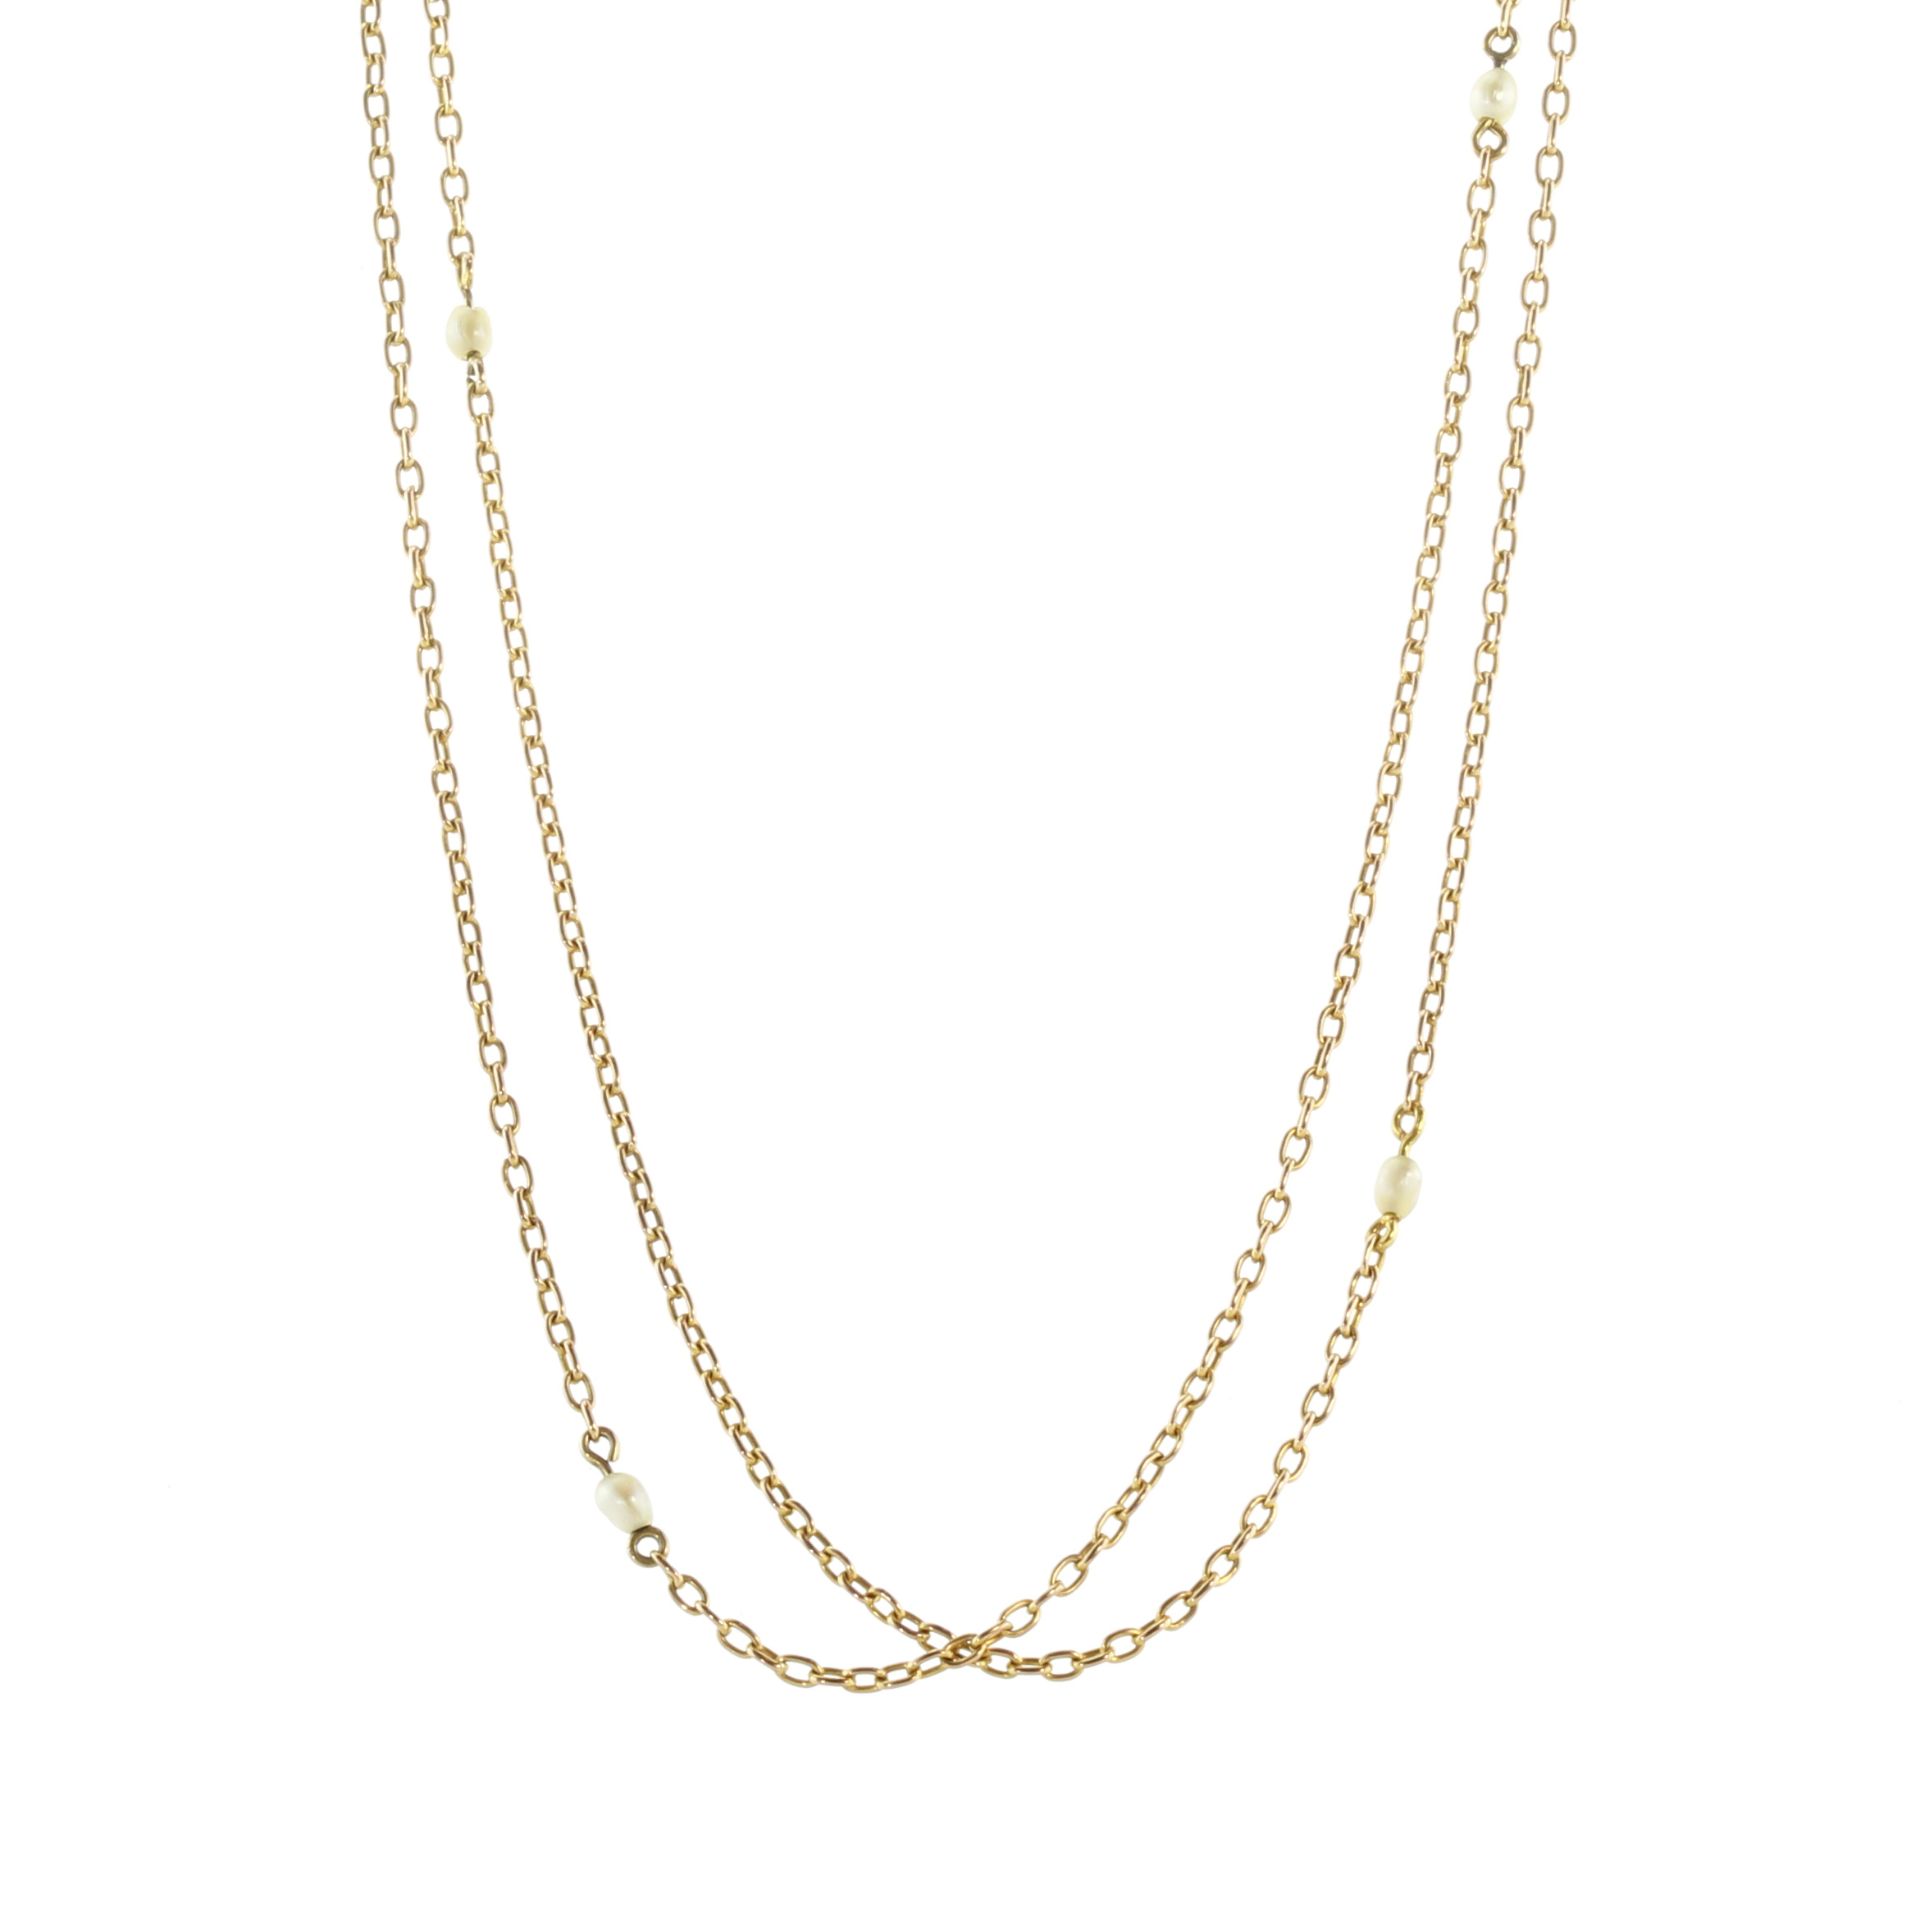 An antique pearl sautoir necklace in high carat yellow gold designed as a long fine gold chain